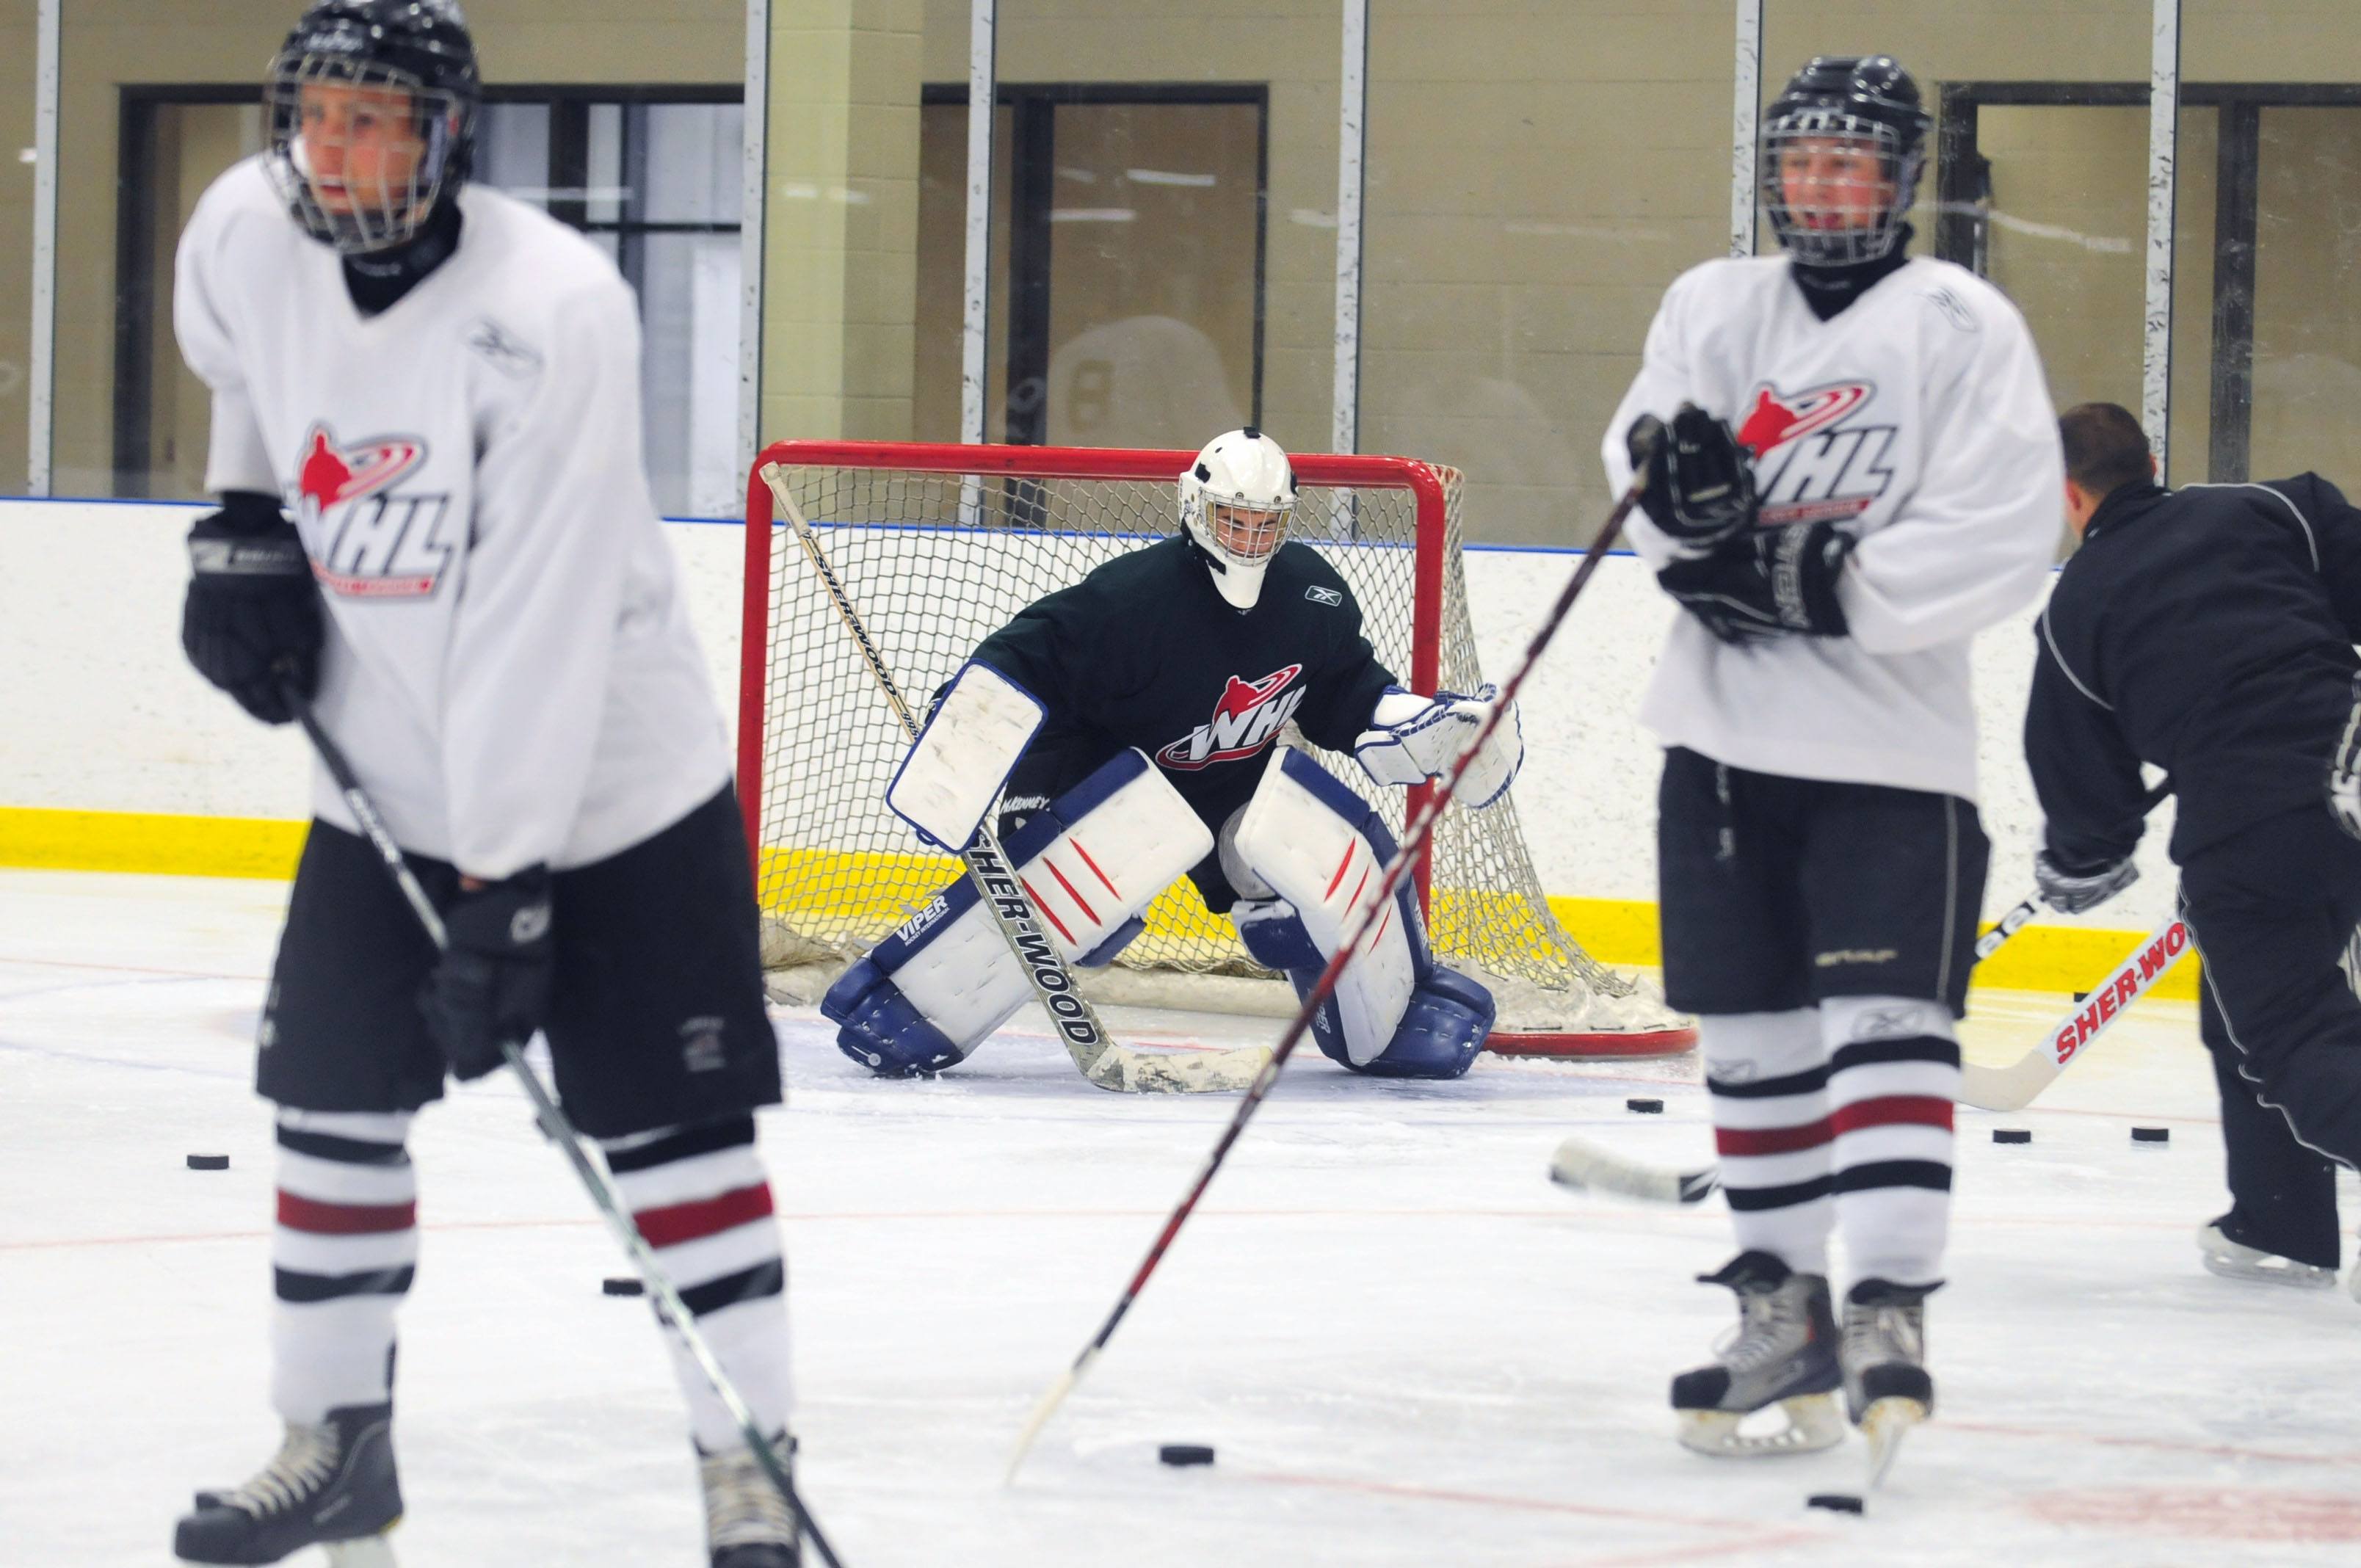 NEW PROSPECTS- Rebels Camp was held this past week as young athletes showed off their skills at the Penhold Multiplex.